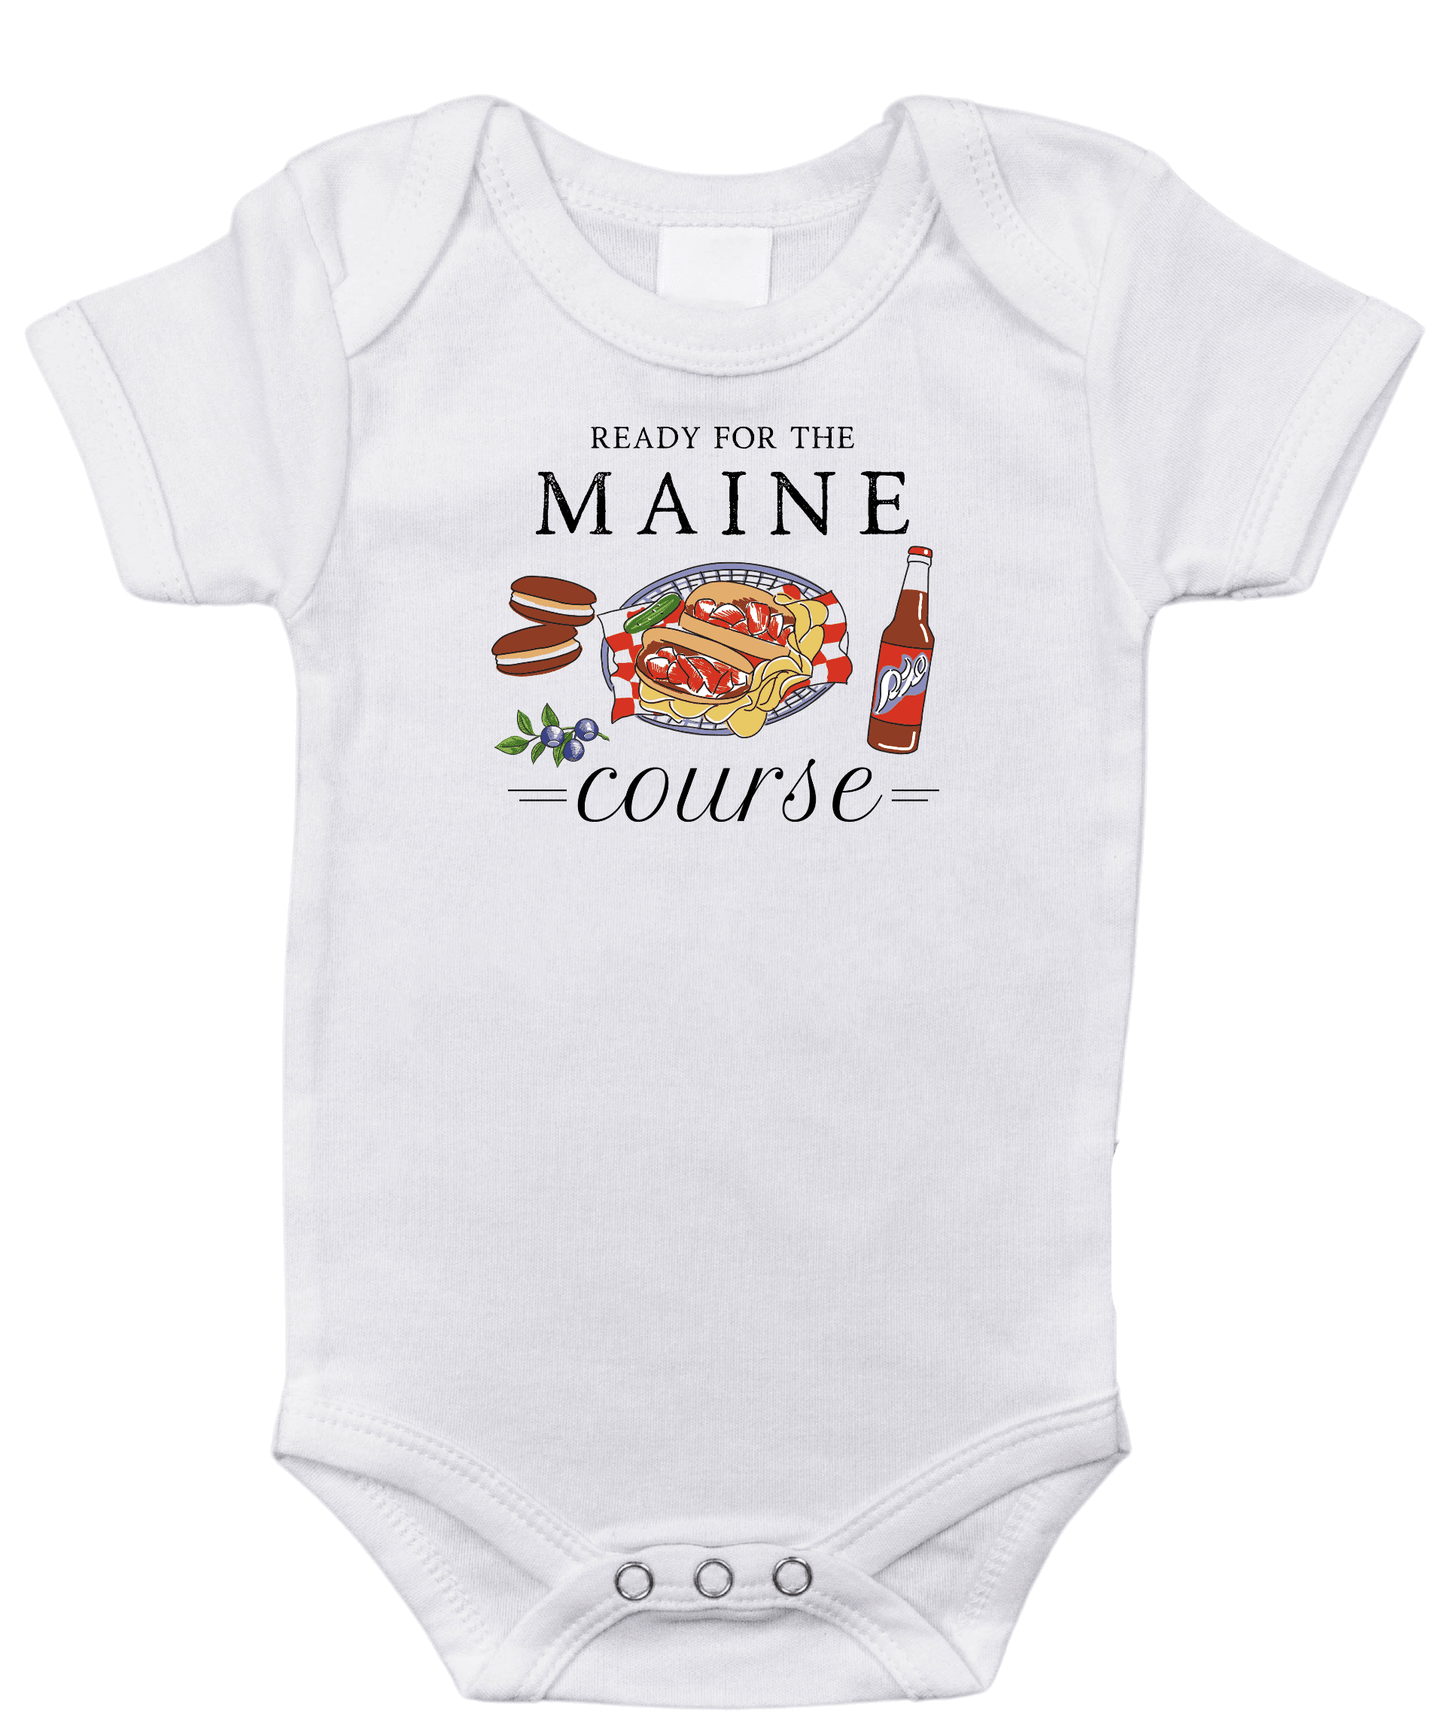 White baby onesie with "Maine Course" text and a lobster graphic, evoking a playful and regional charm.